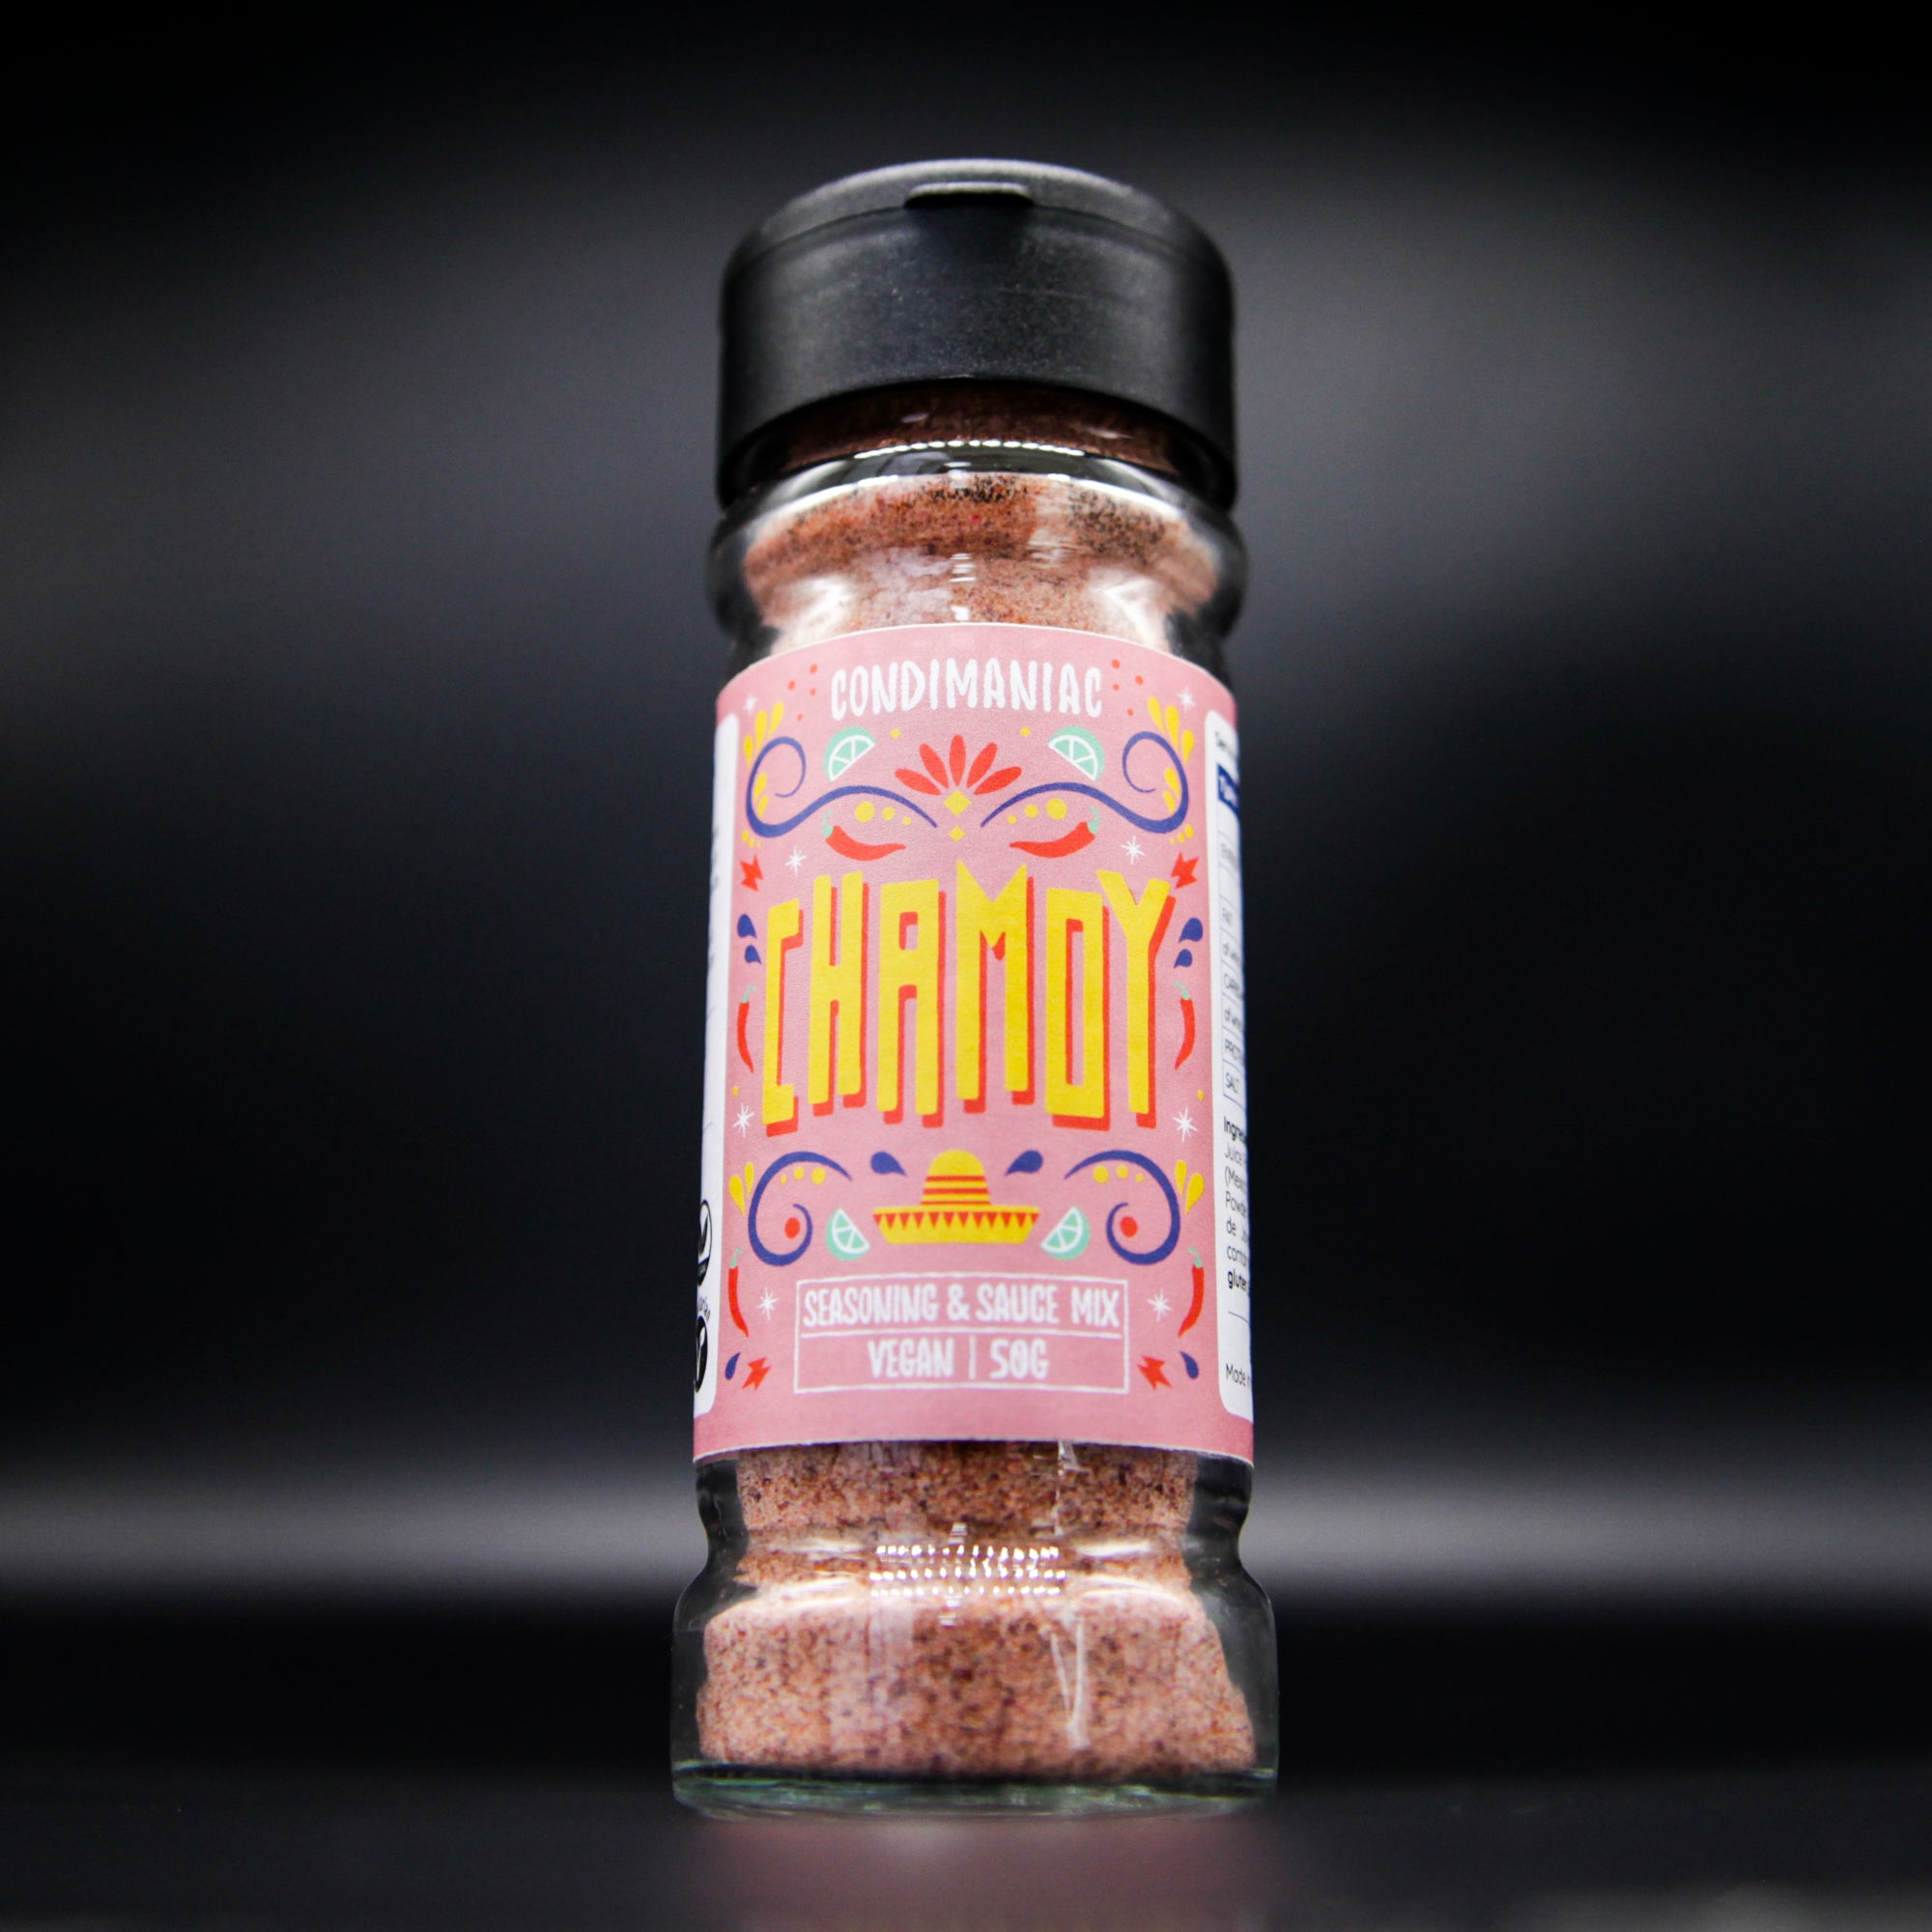 Chamoy Seasoning is now a thing and it's made right here in the UK by us, Condimaniac!